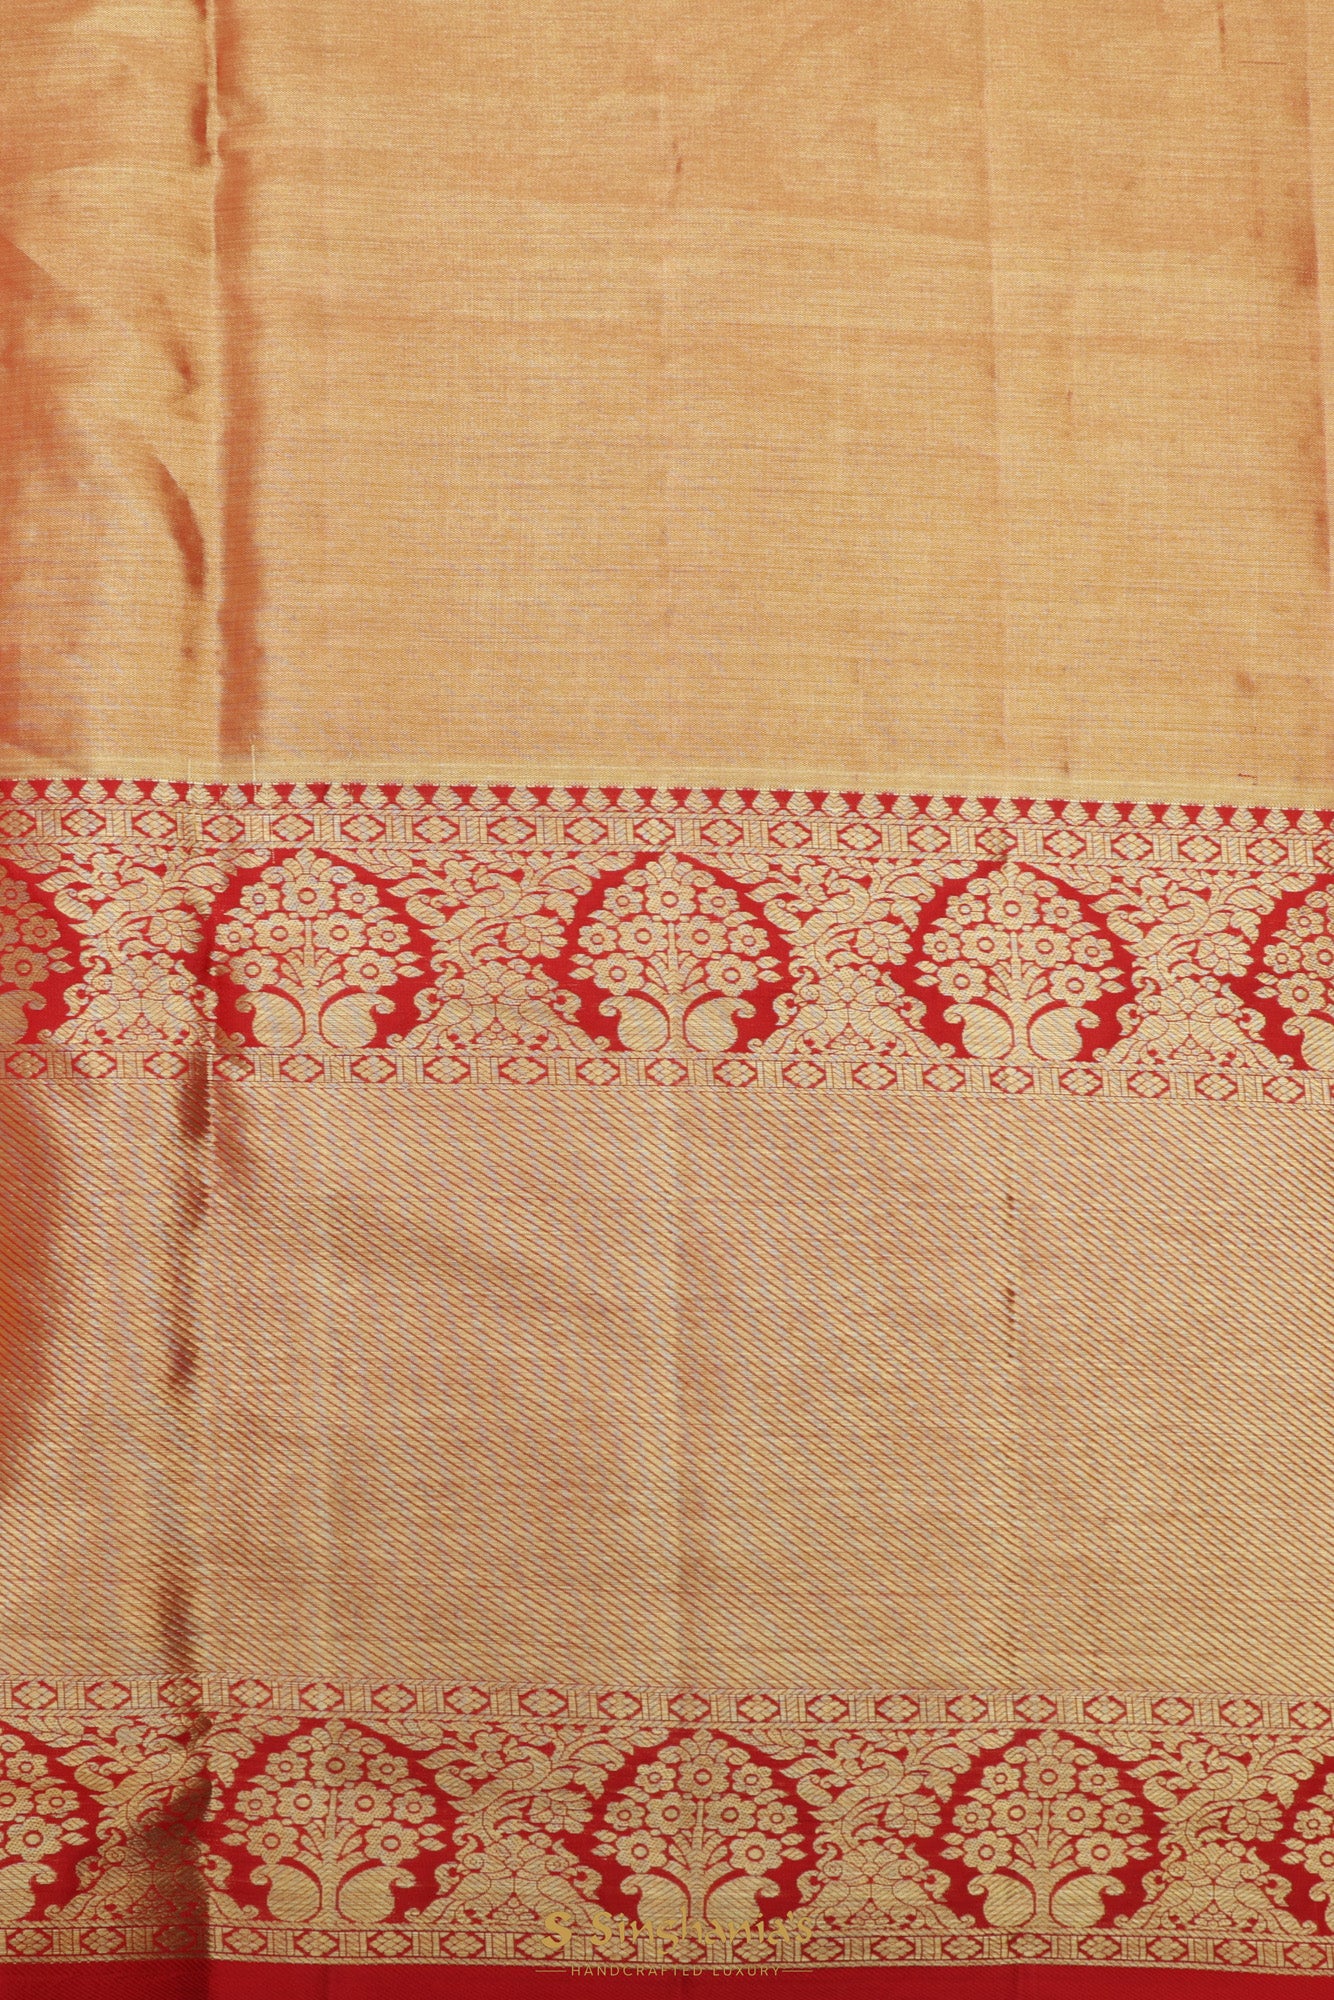 Coral Red Tissue Kanjivaram Saree With Floral Jaal Weaving